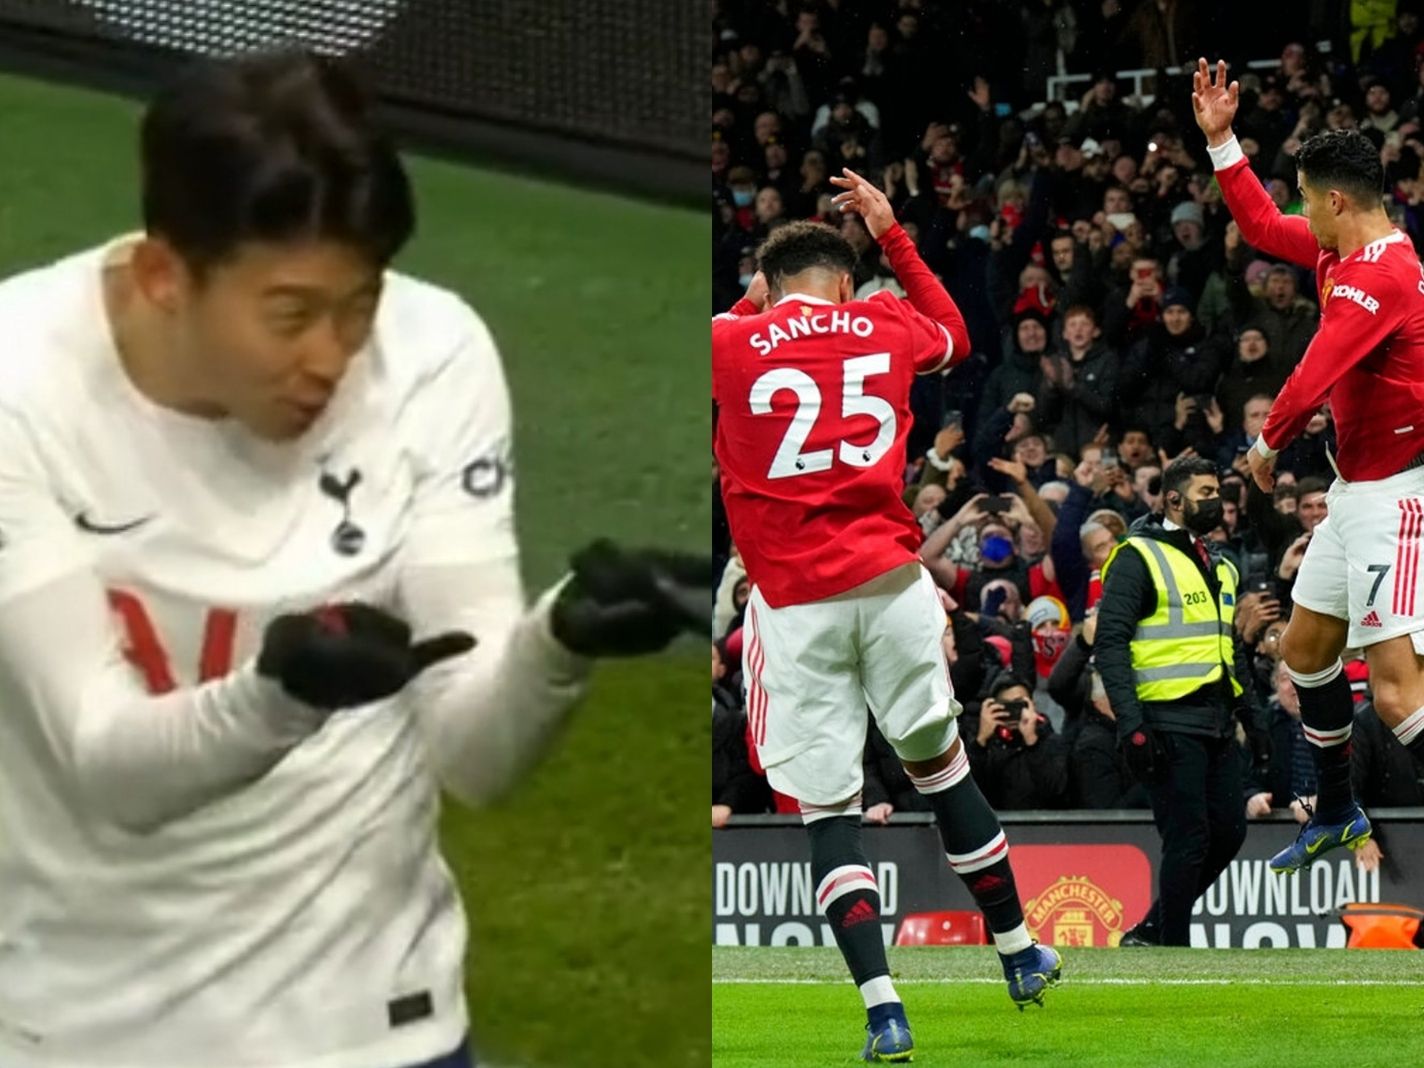 On Loop: Man United trio activate ‘triple SIU’ as Son Heung-min shoots spider webs